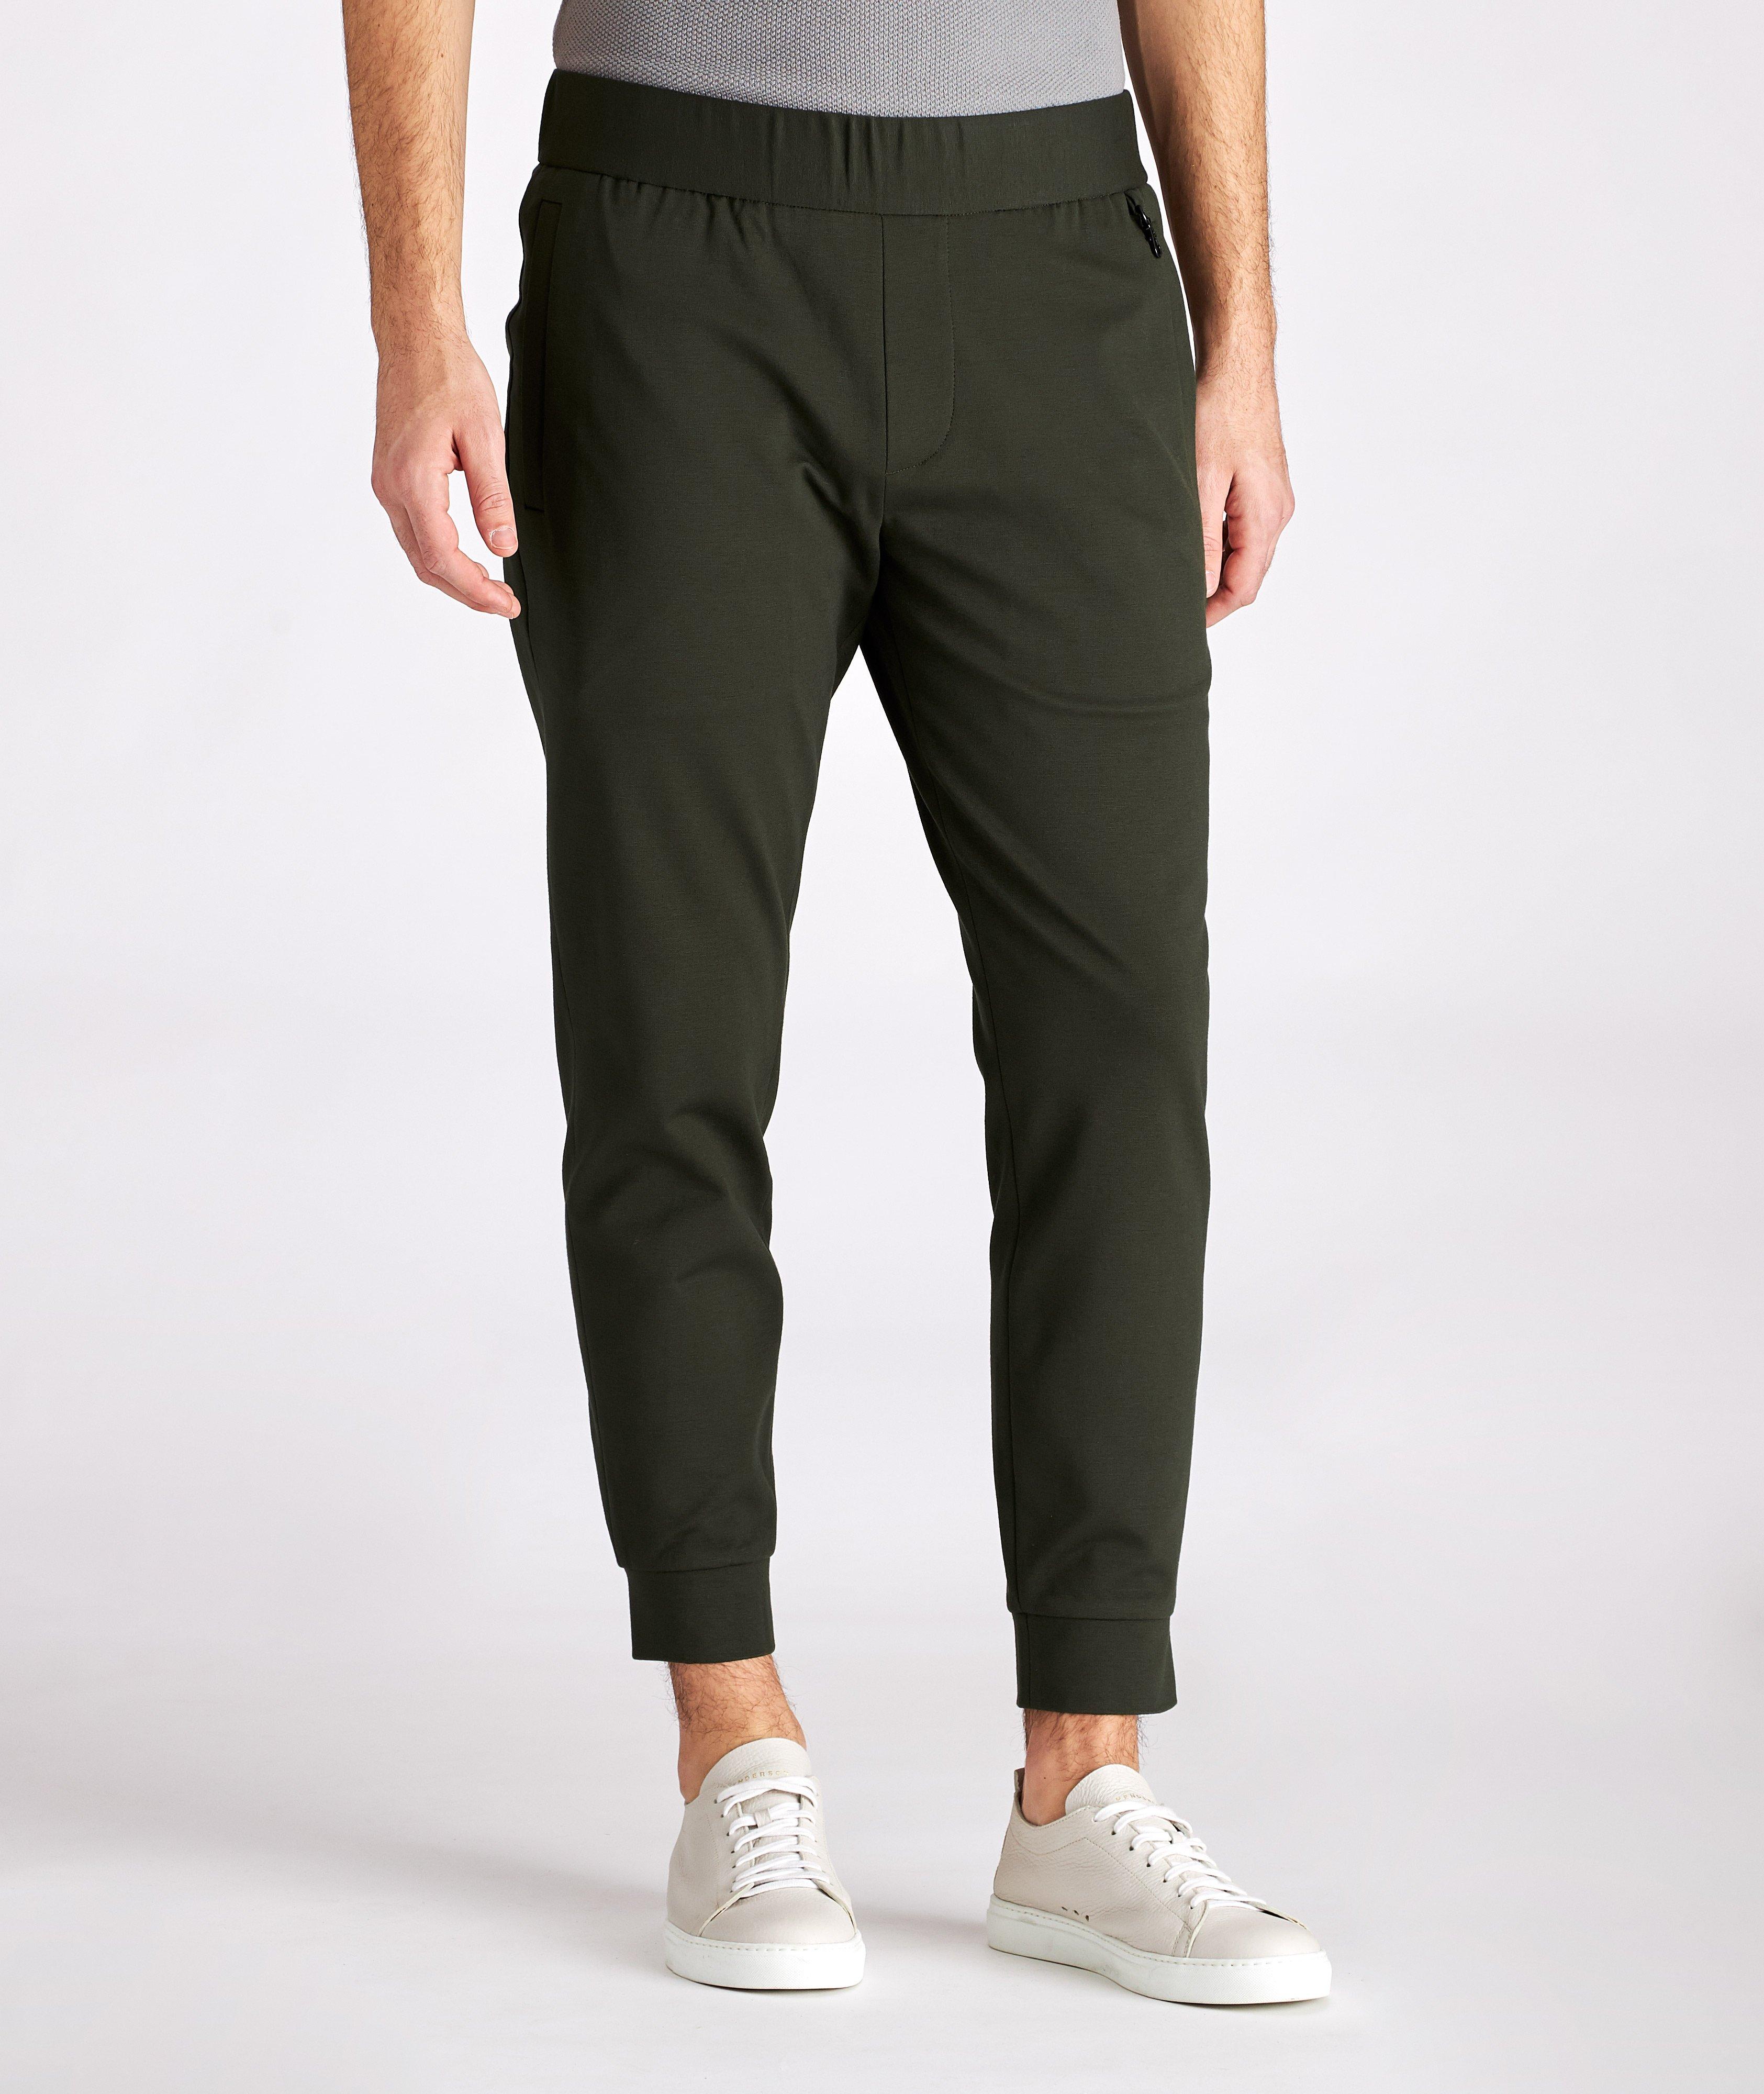 Travel Essential Jersey Joggers image 0